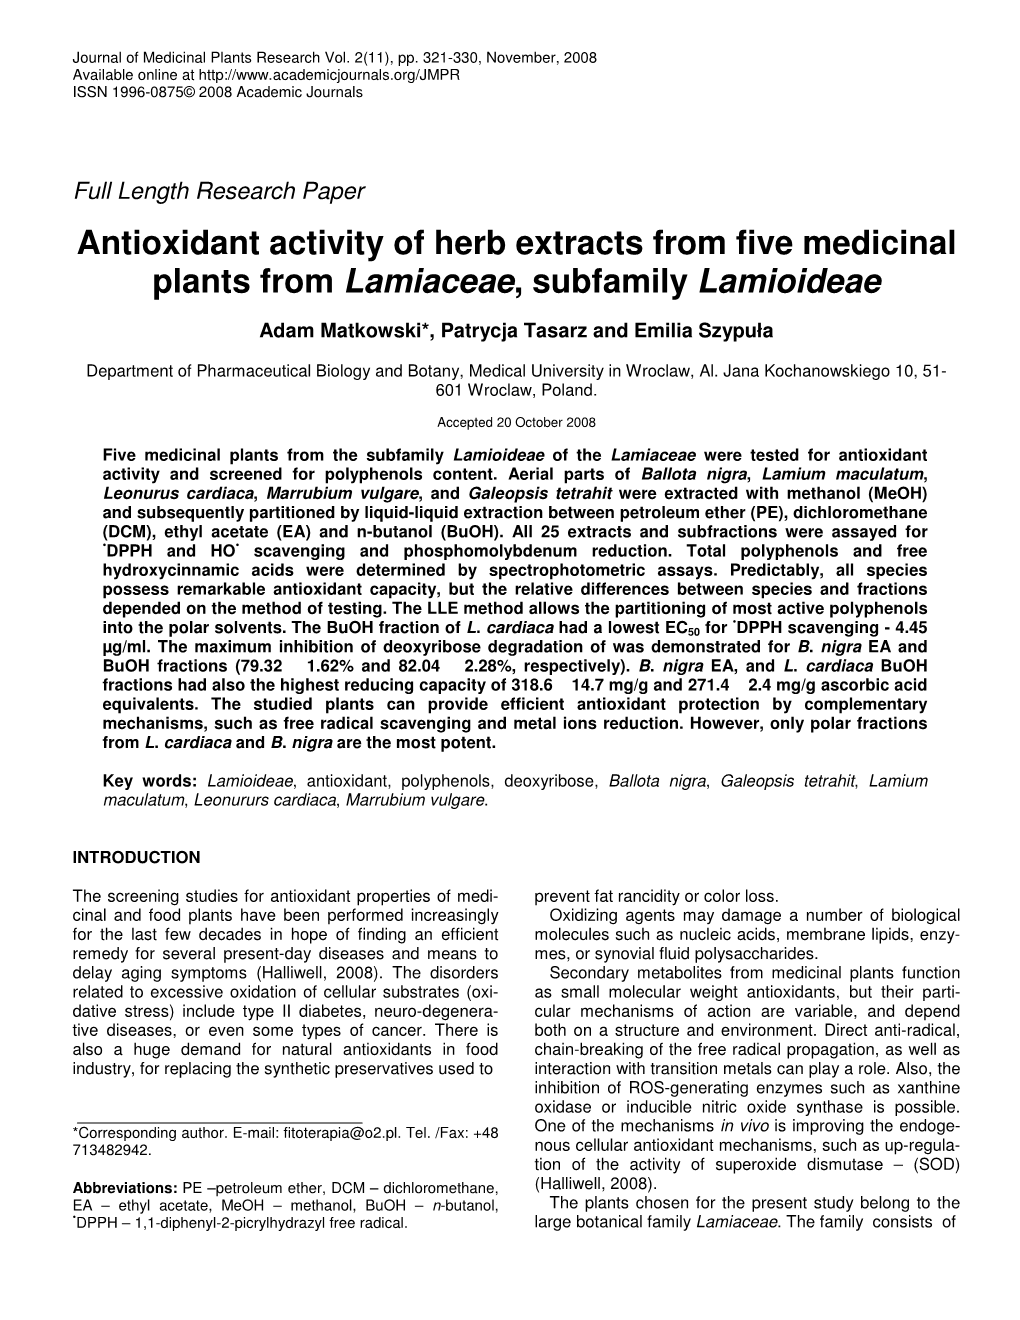 Antioxidant Activity of Herb Extracts from Five Medicinal Plants from Lamiaceae, Subfamily Lamioideae